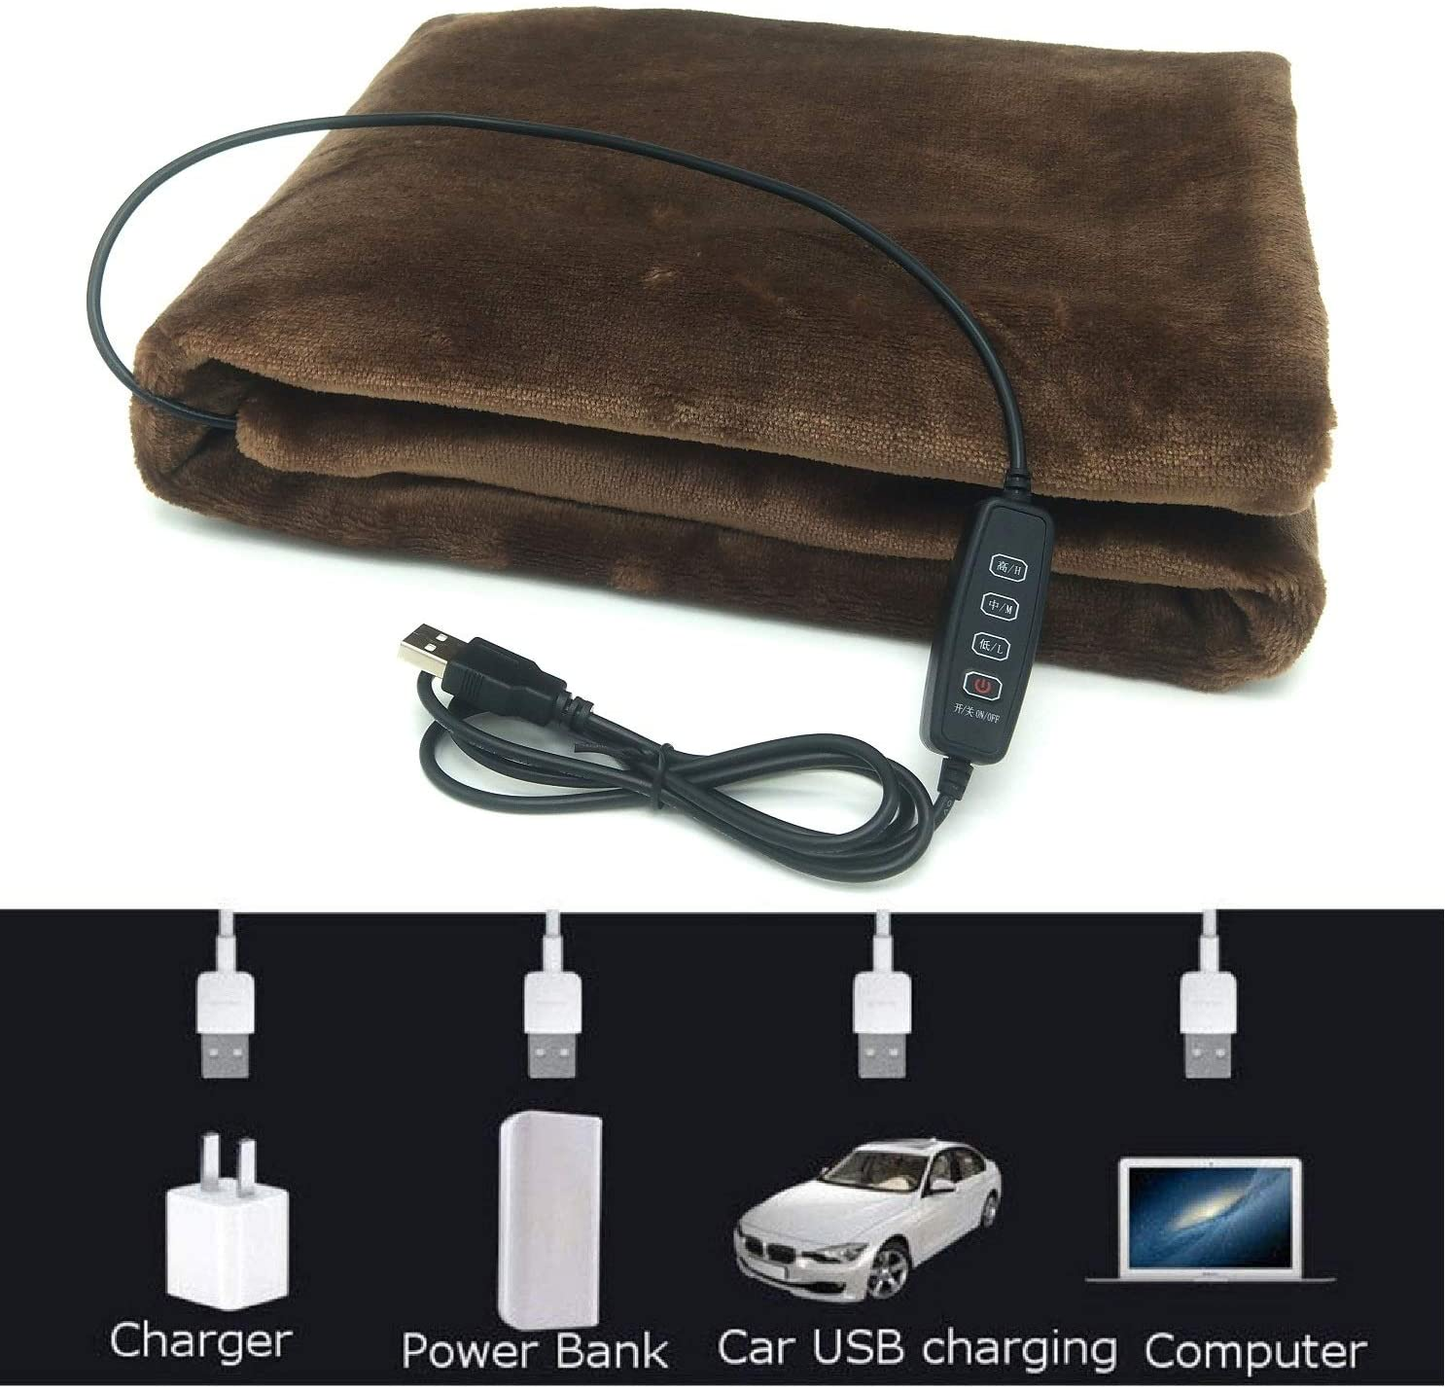 Sole-Go USB Electric Heating Shawl Electric Flannel Blankets Heated Throws 5V/2A - 3 Heating Settings for Car Office Home 34" X 23" (Coffee)